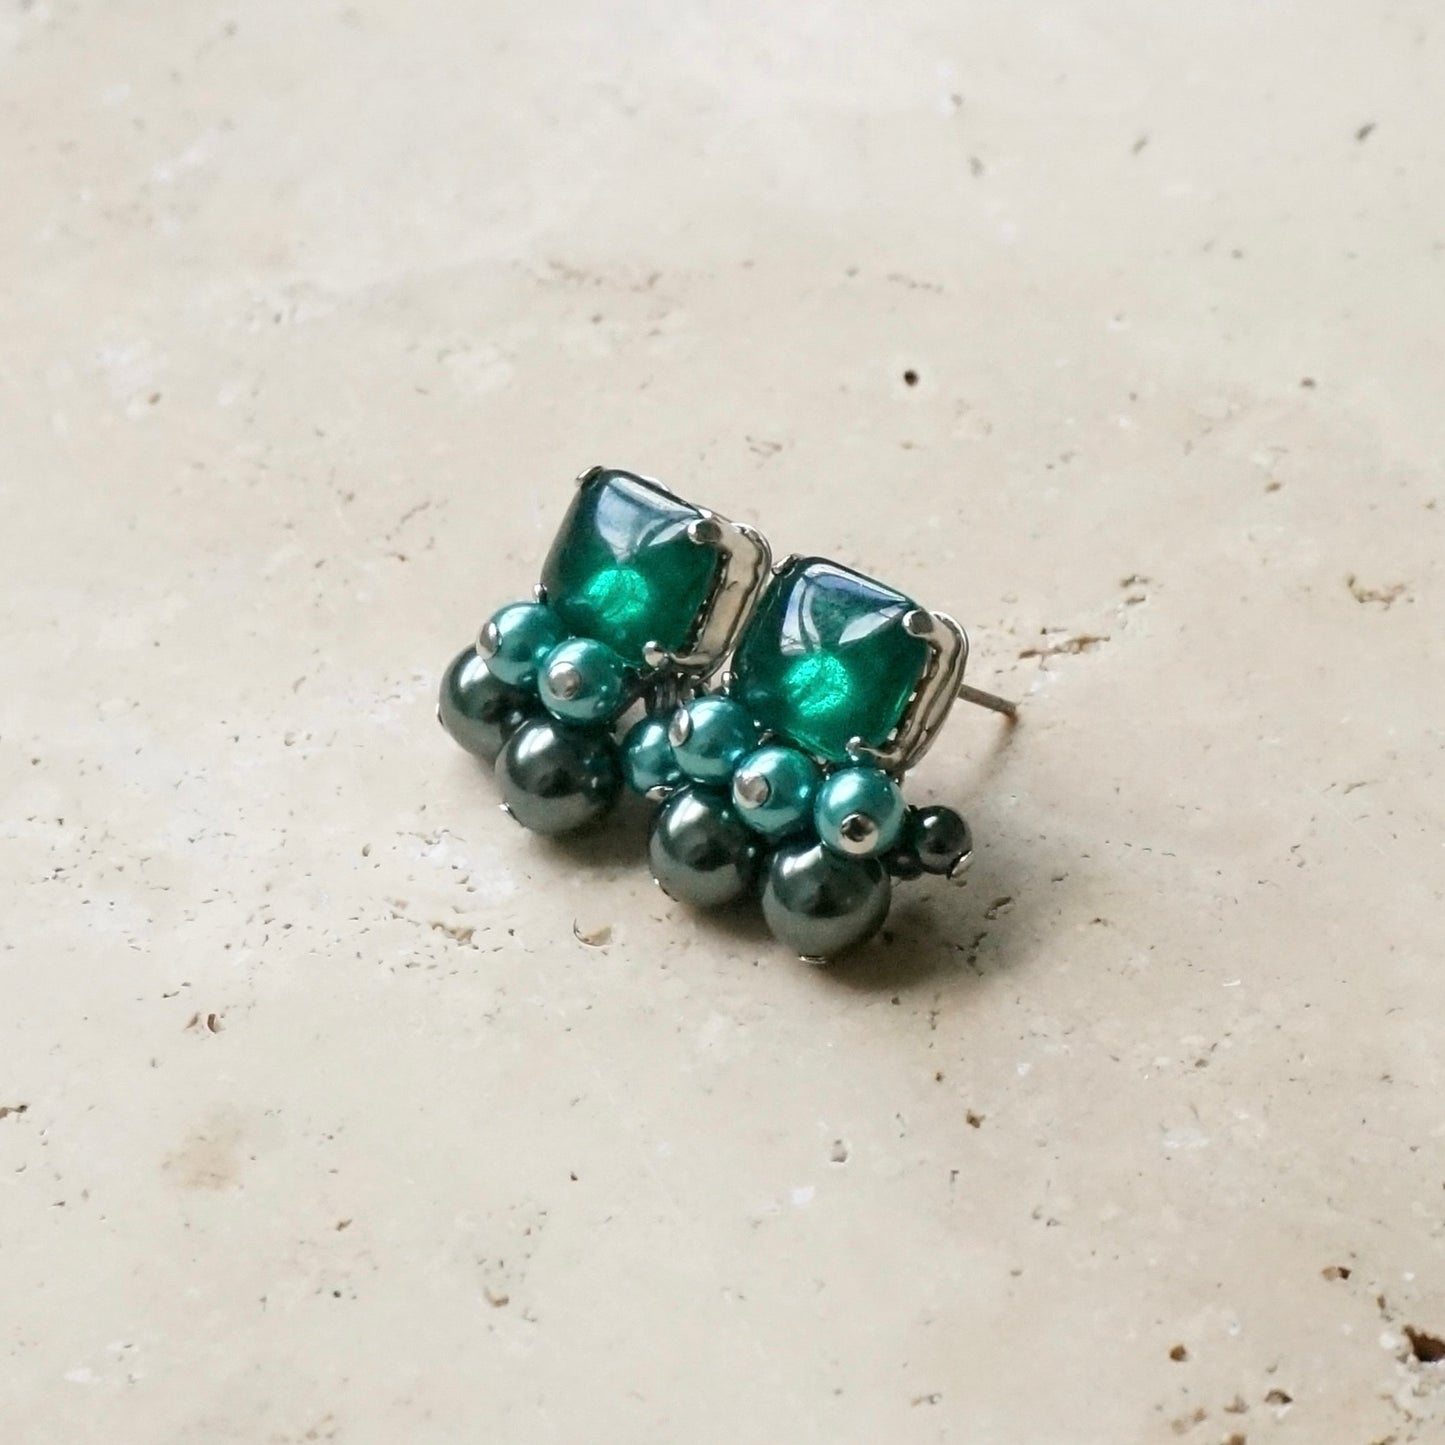 Square Stone Pearls Earring